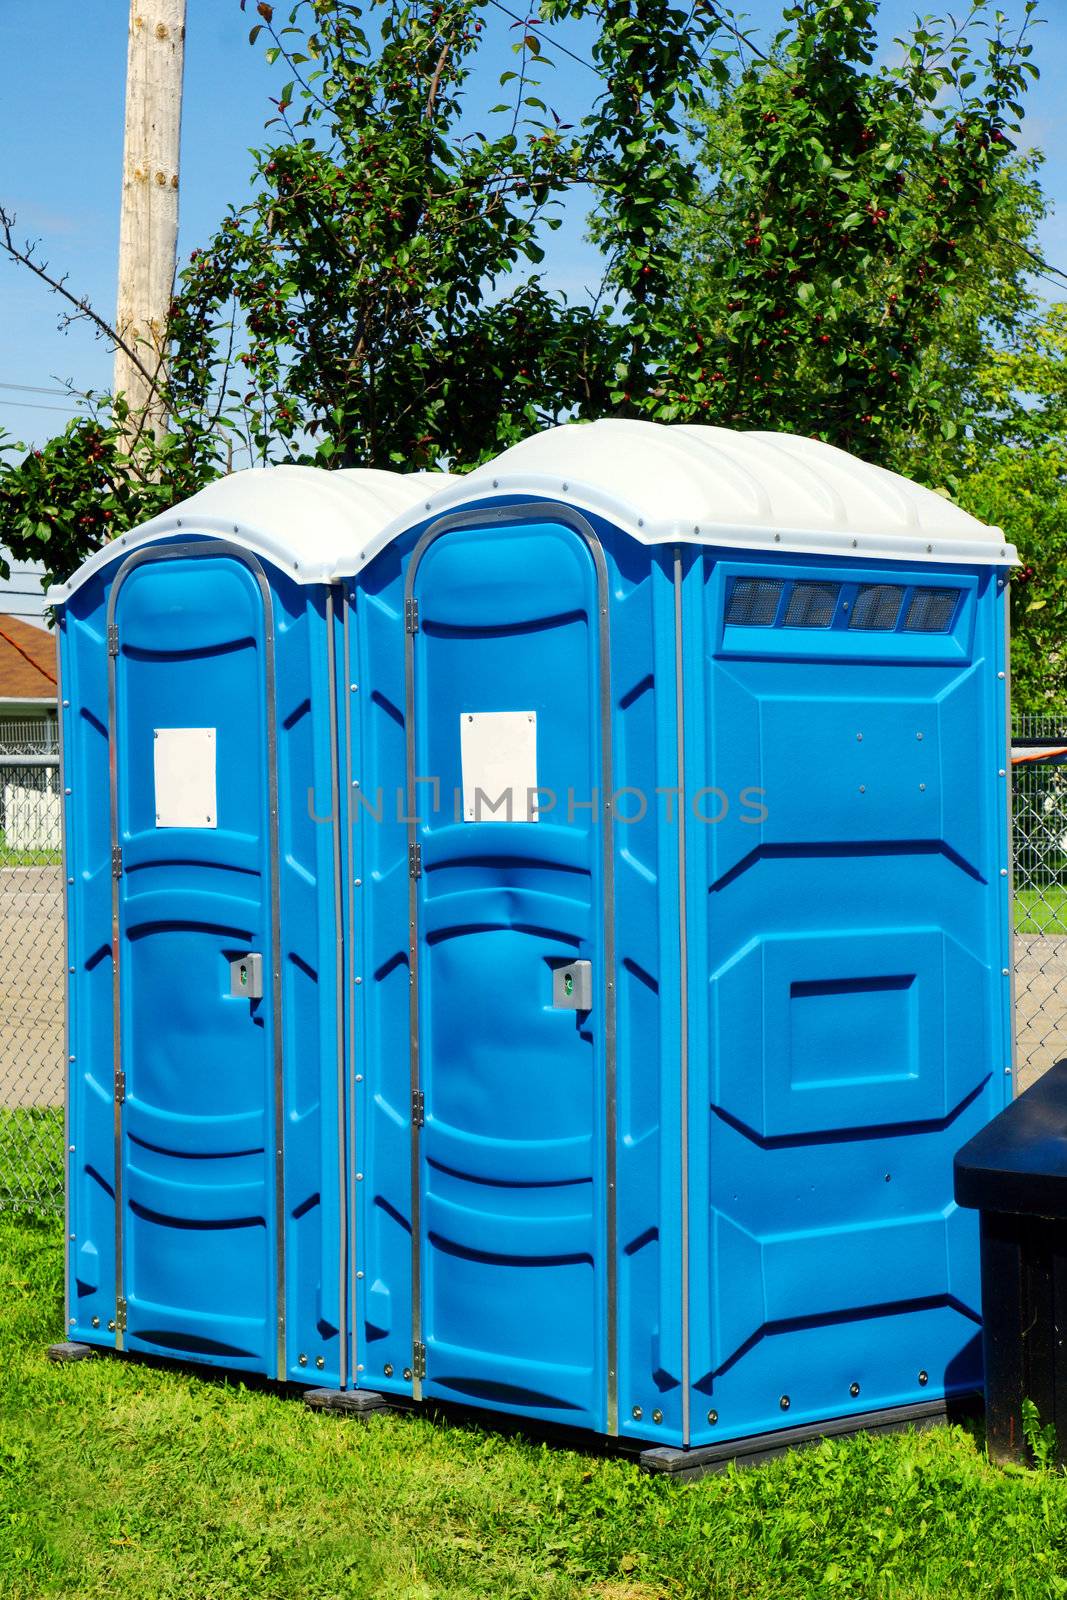 Two portable toilet or loo in blue plastic at a park public event or concert, with white sign on door ready for text.